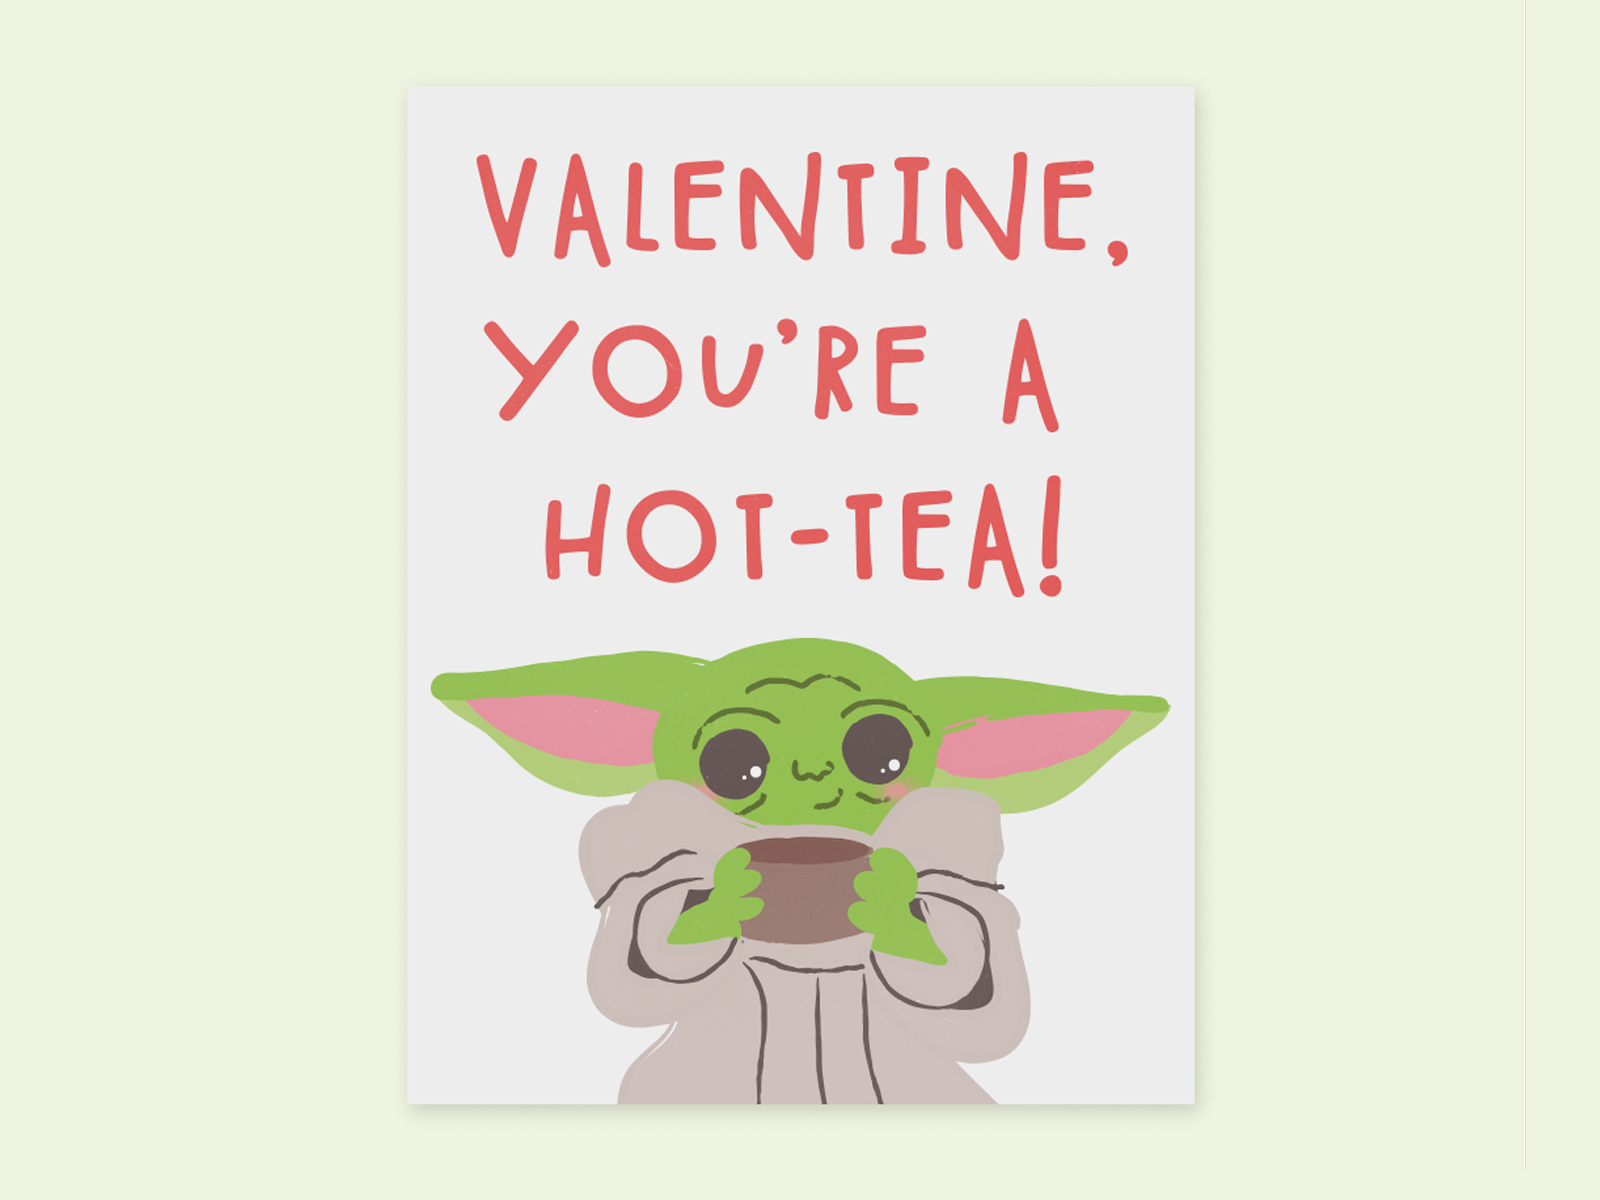 Valentines Day Card Baby Yoda by Michele McCammon on Dribbble